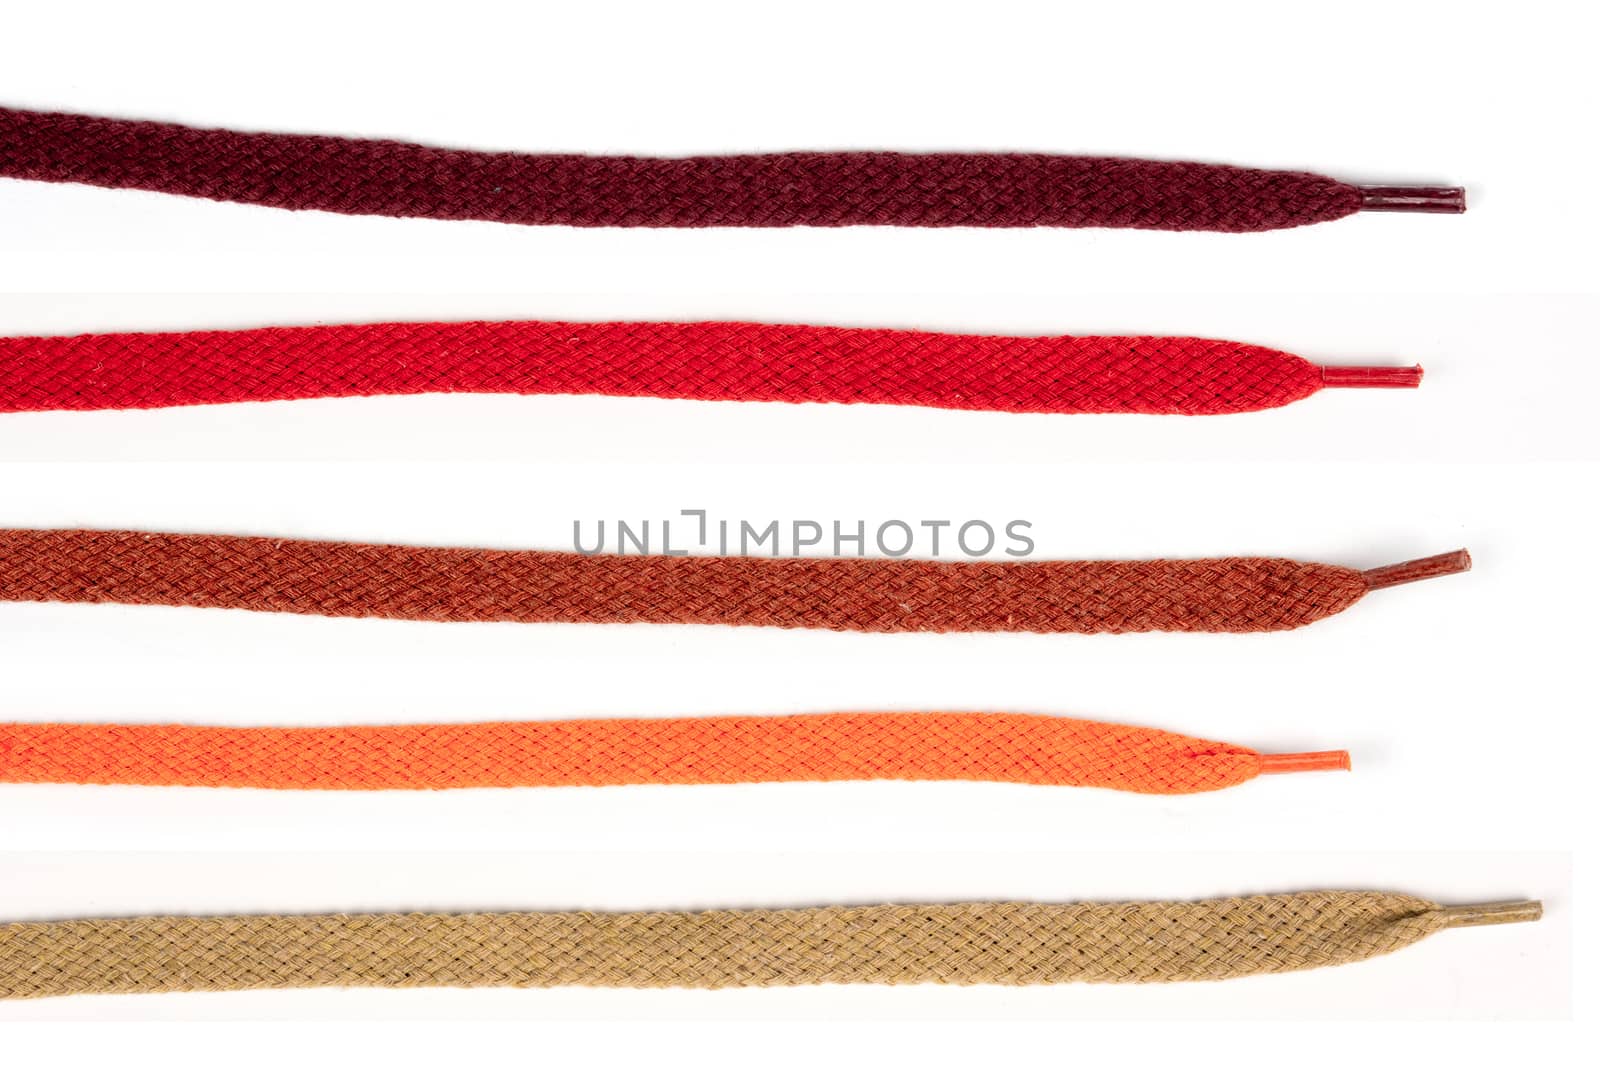 Collection of colored cotton laces for shoes with tip on white background